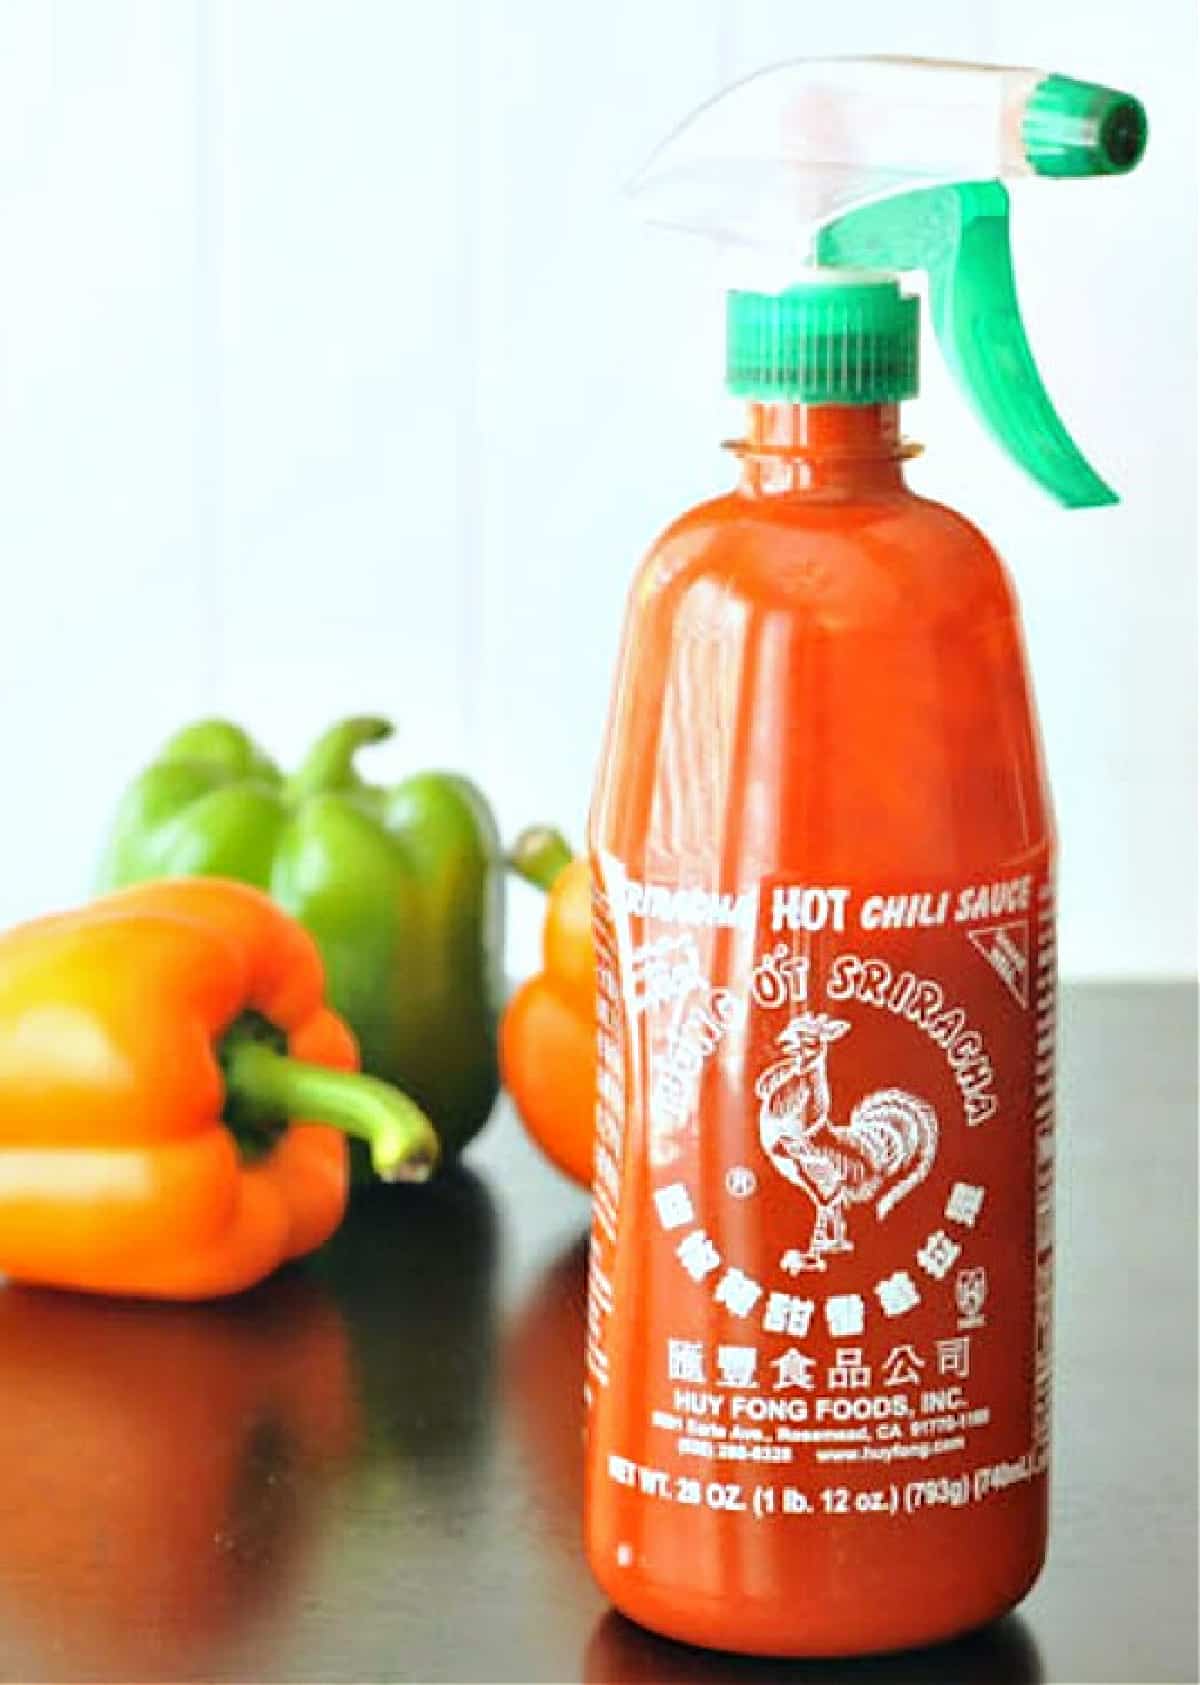 A bottle of sriracha with the normal top replaced with a nozzle sprayer. Three peppers sit behind the bottle on a black shiny surface.